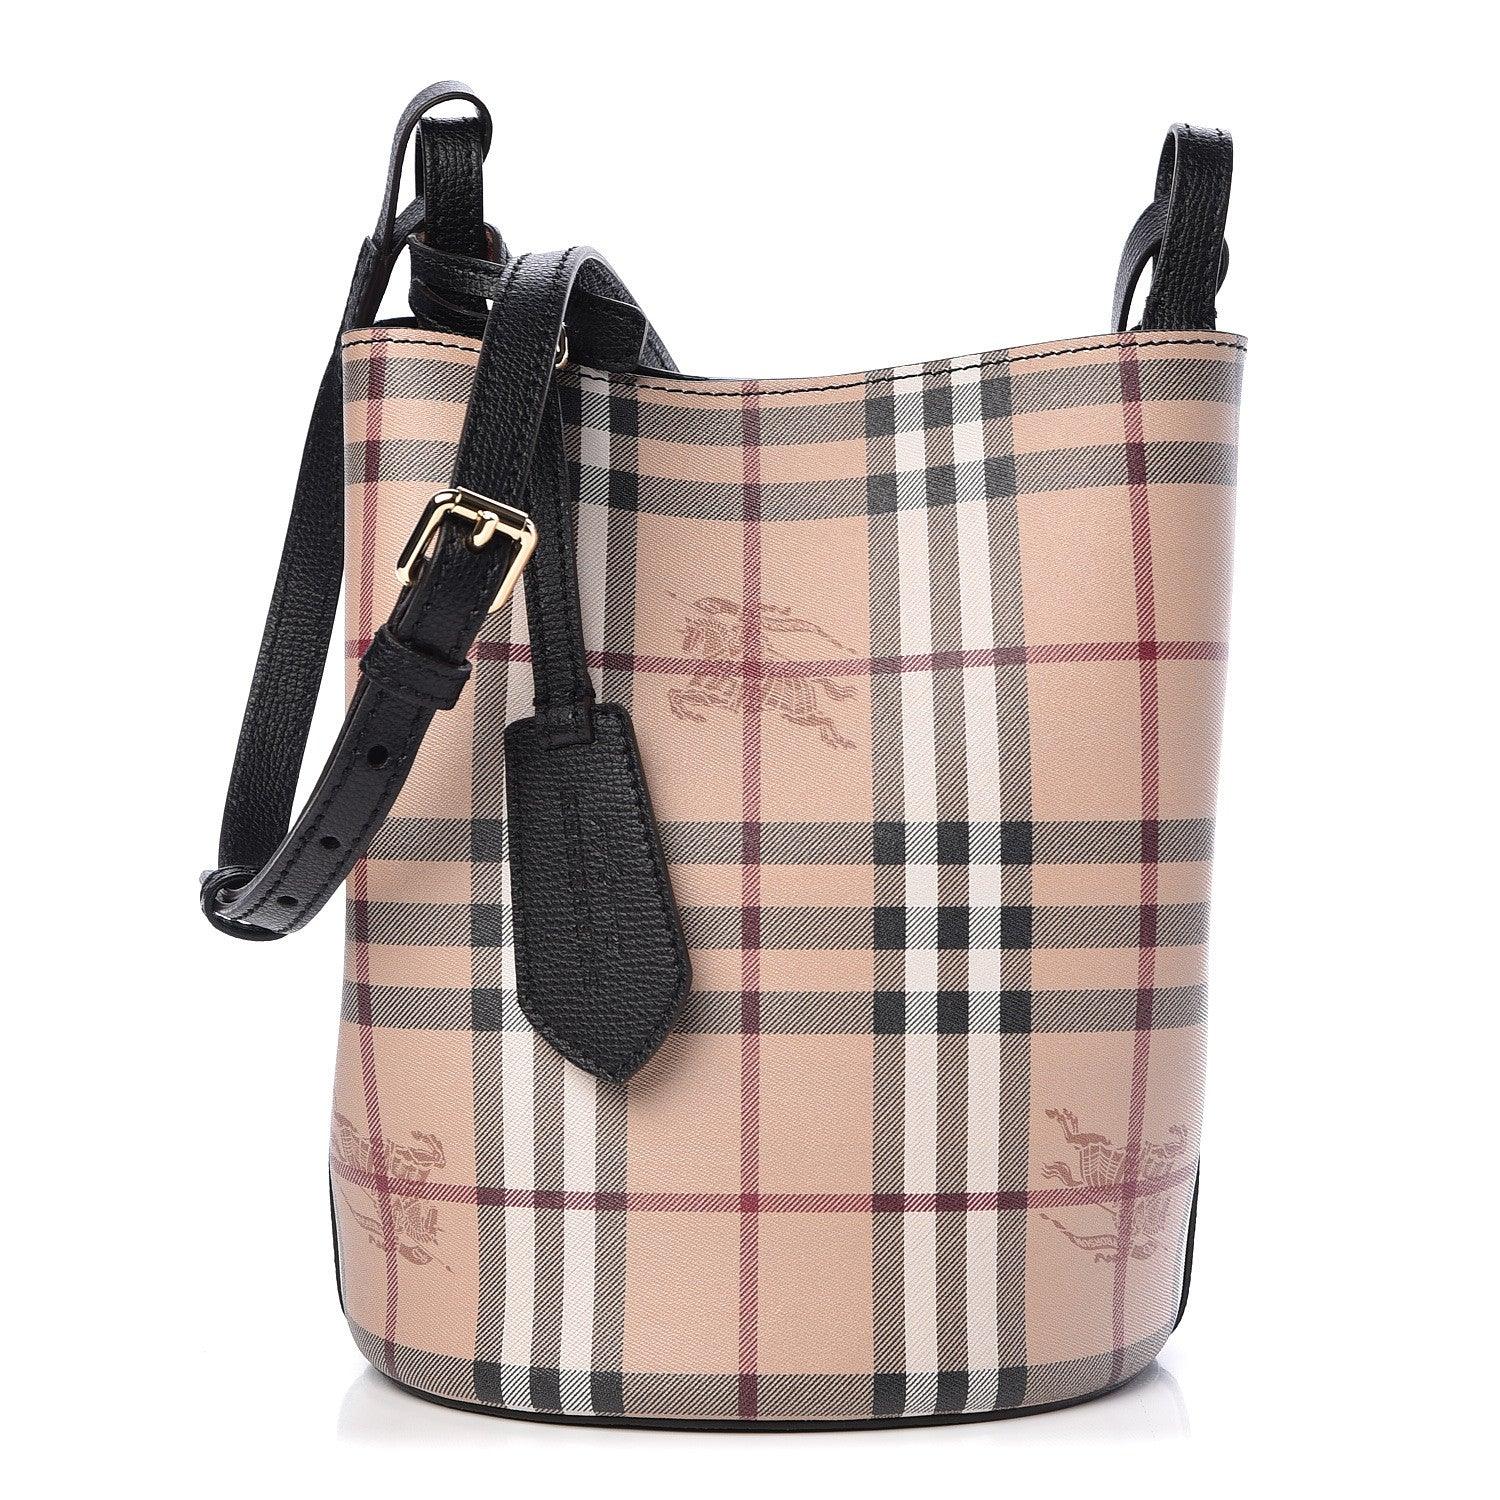 Shop For BURBERRY online at Cruise Fashion